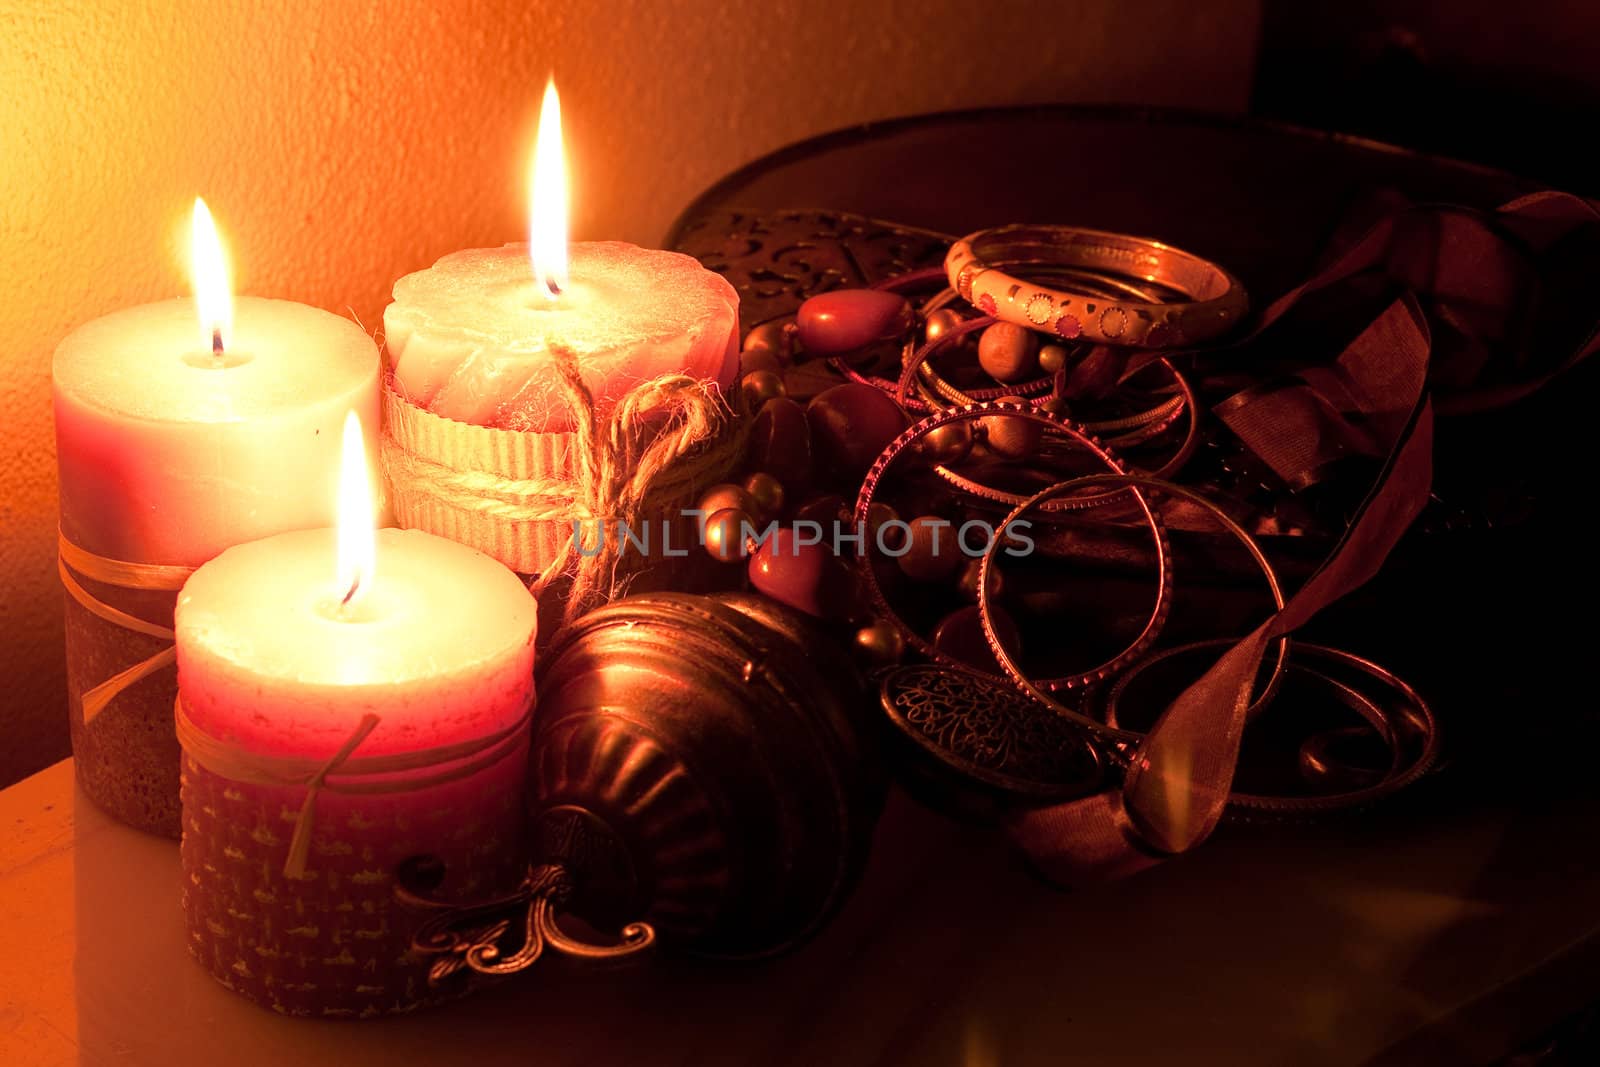 jewels with the candle light by dyvan